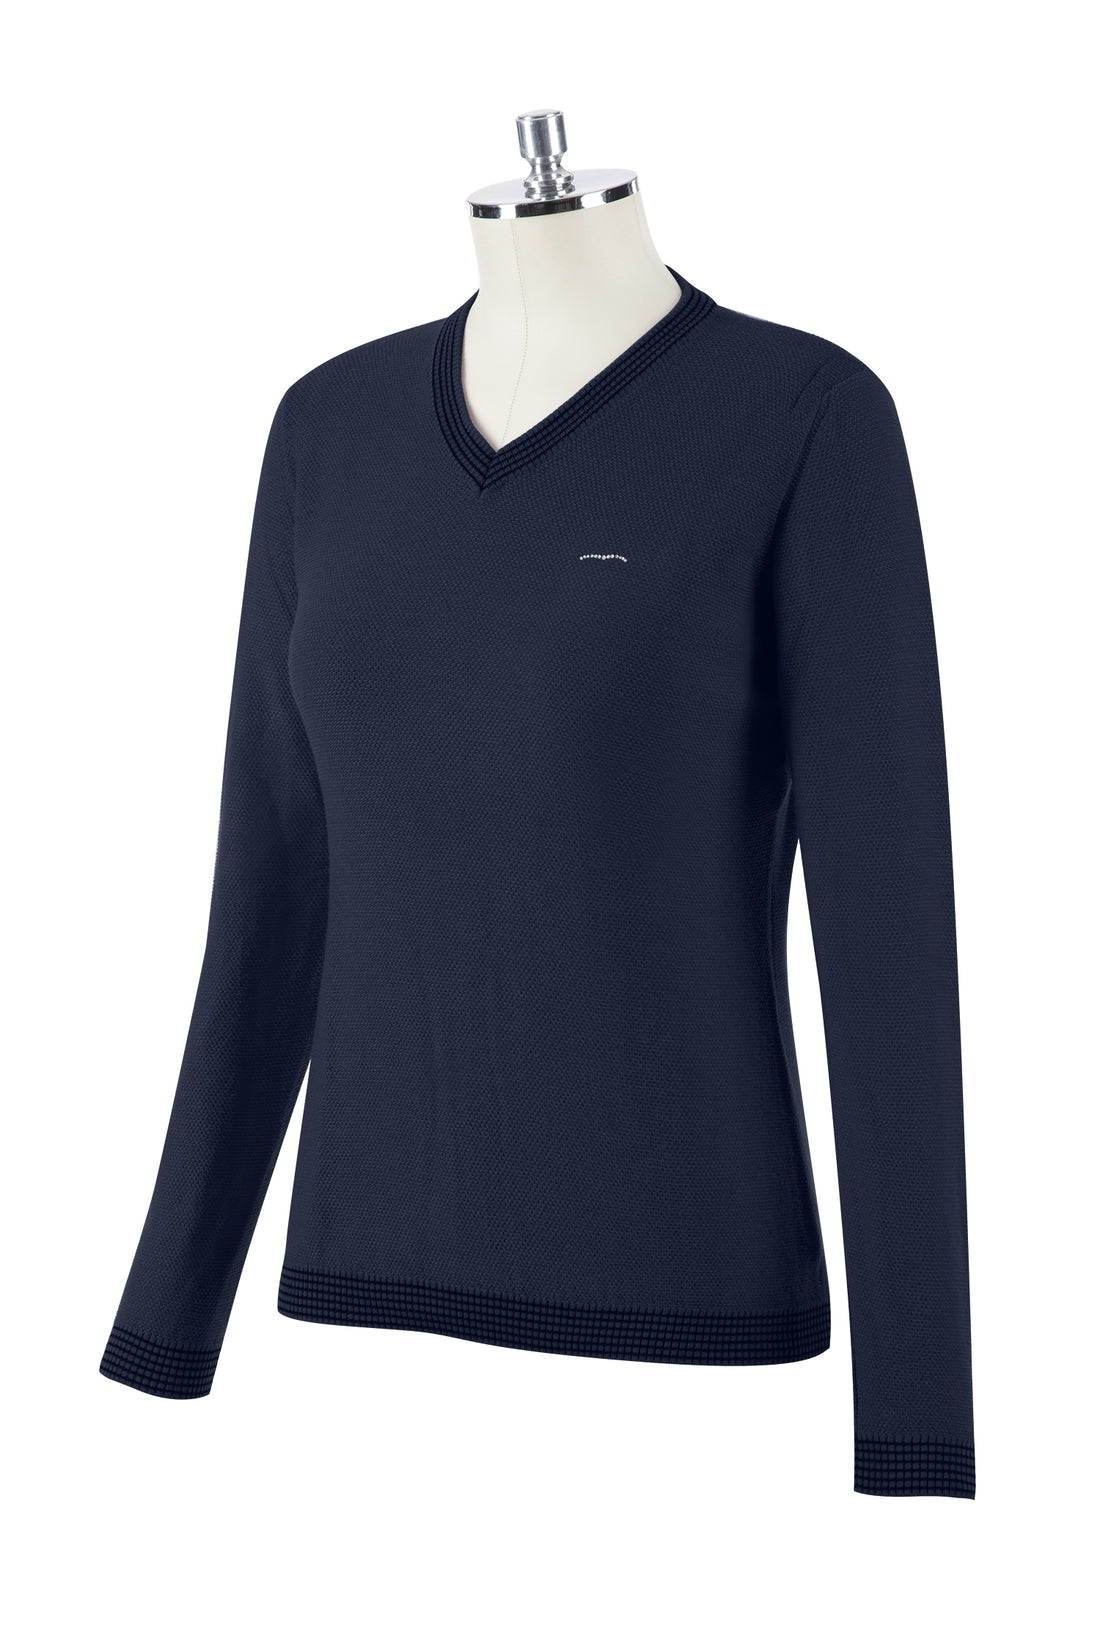 Animo Solima 23S Dame Sweater, Navy